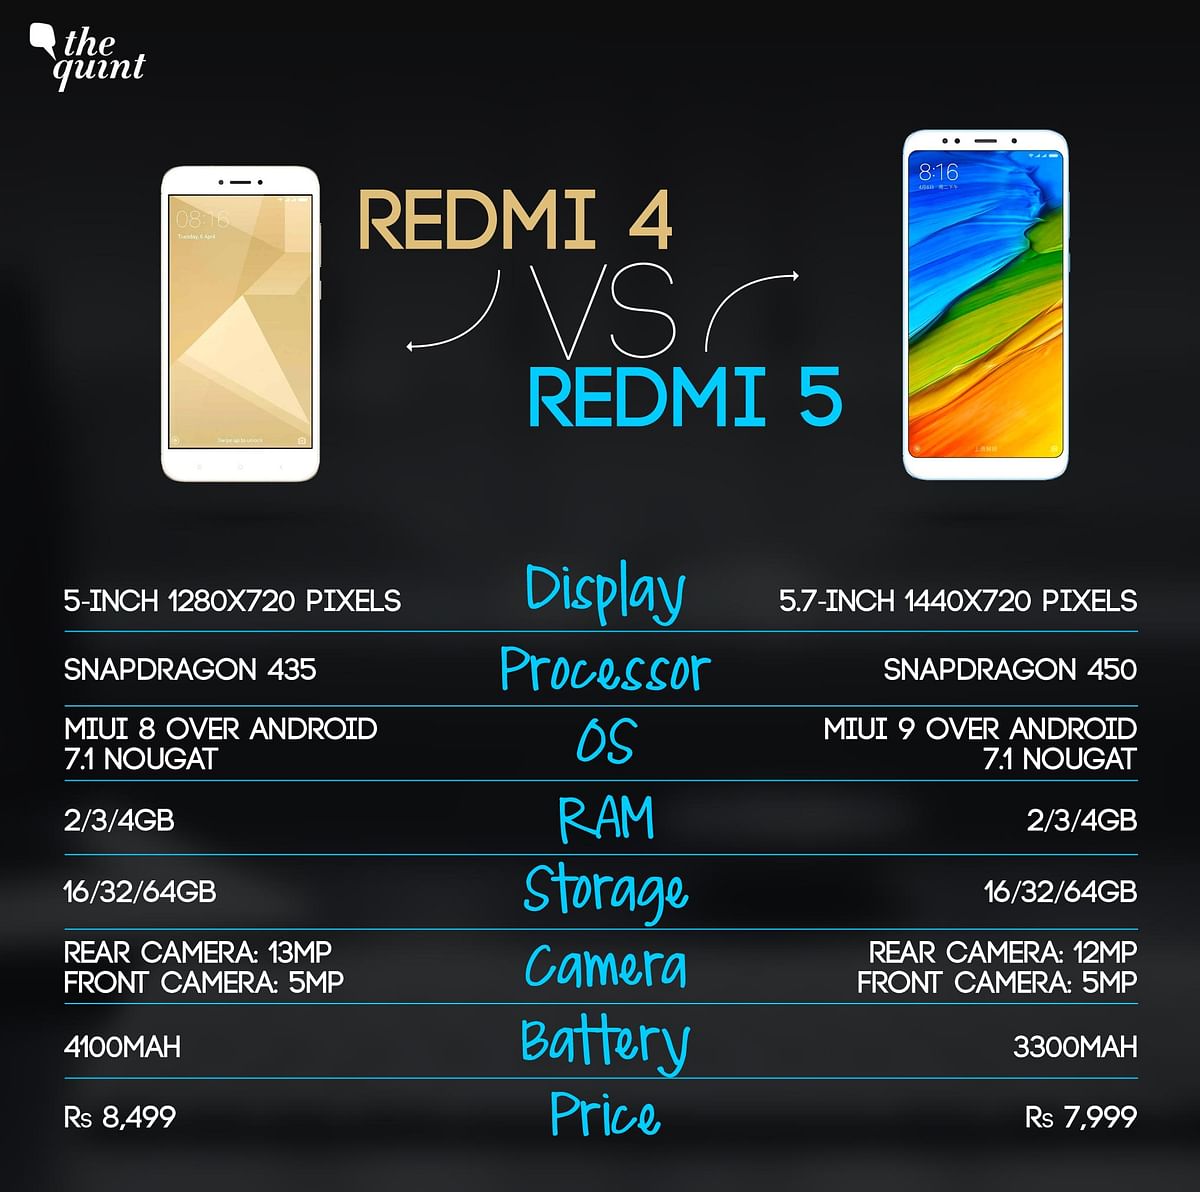 Xiaomi Redmi 5 with an 18:9 screen on a budget might be an exciting option for entry-level buyers. 